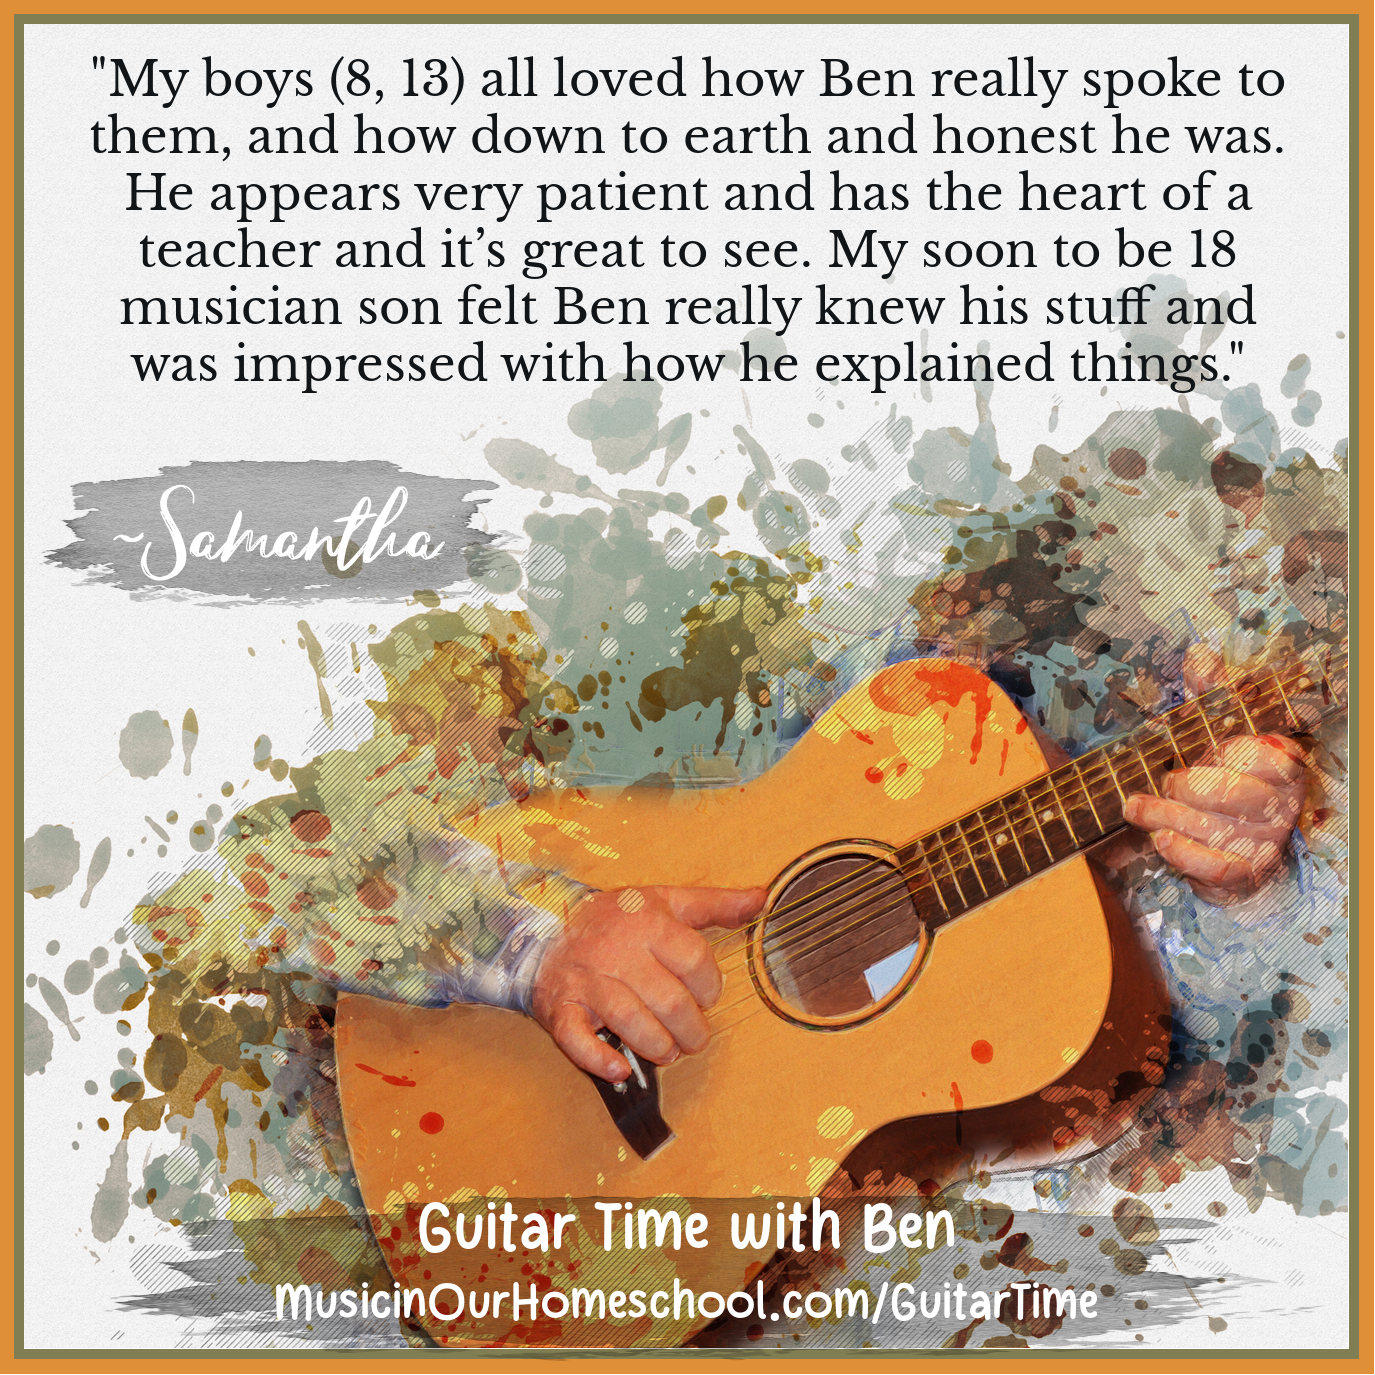 Guitar Time with Ben beginning acoustic guitar lessons course